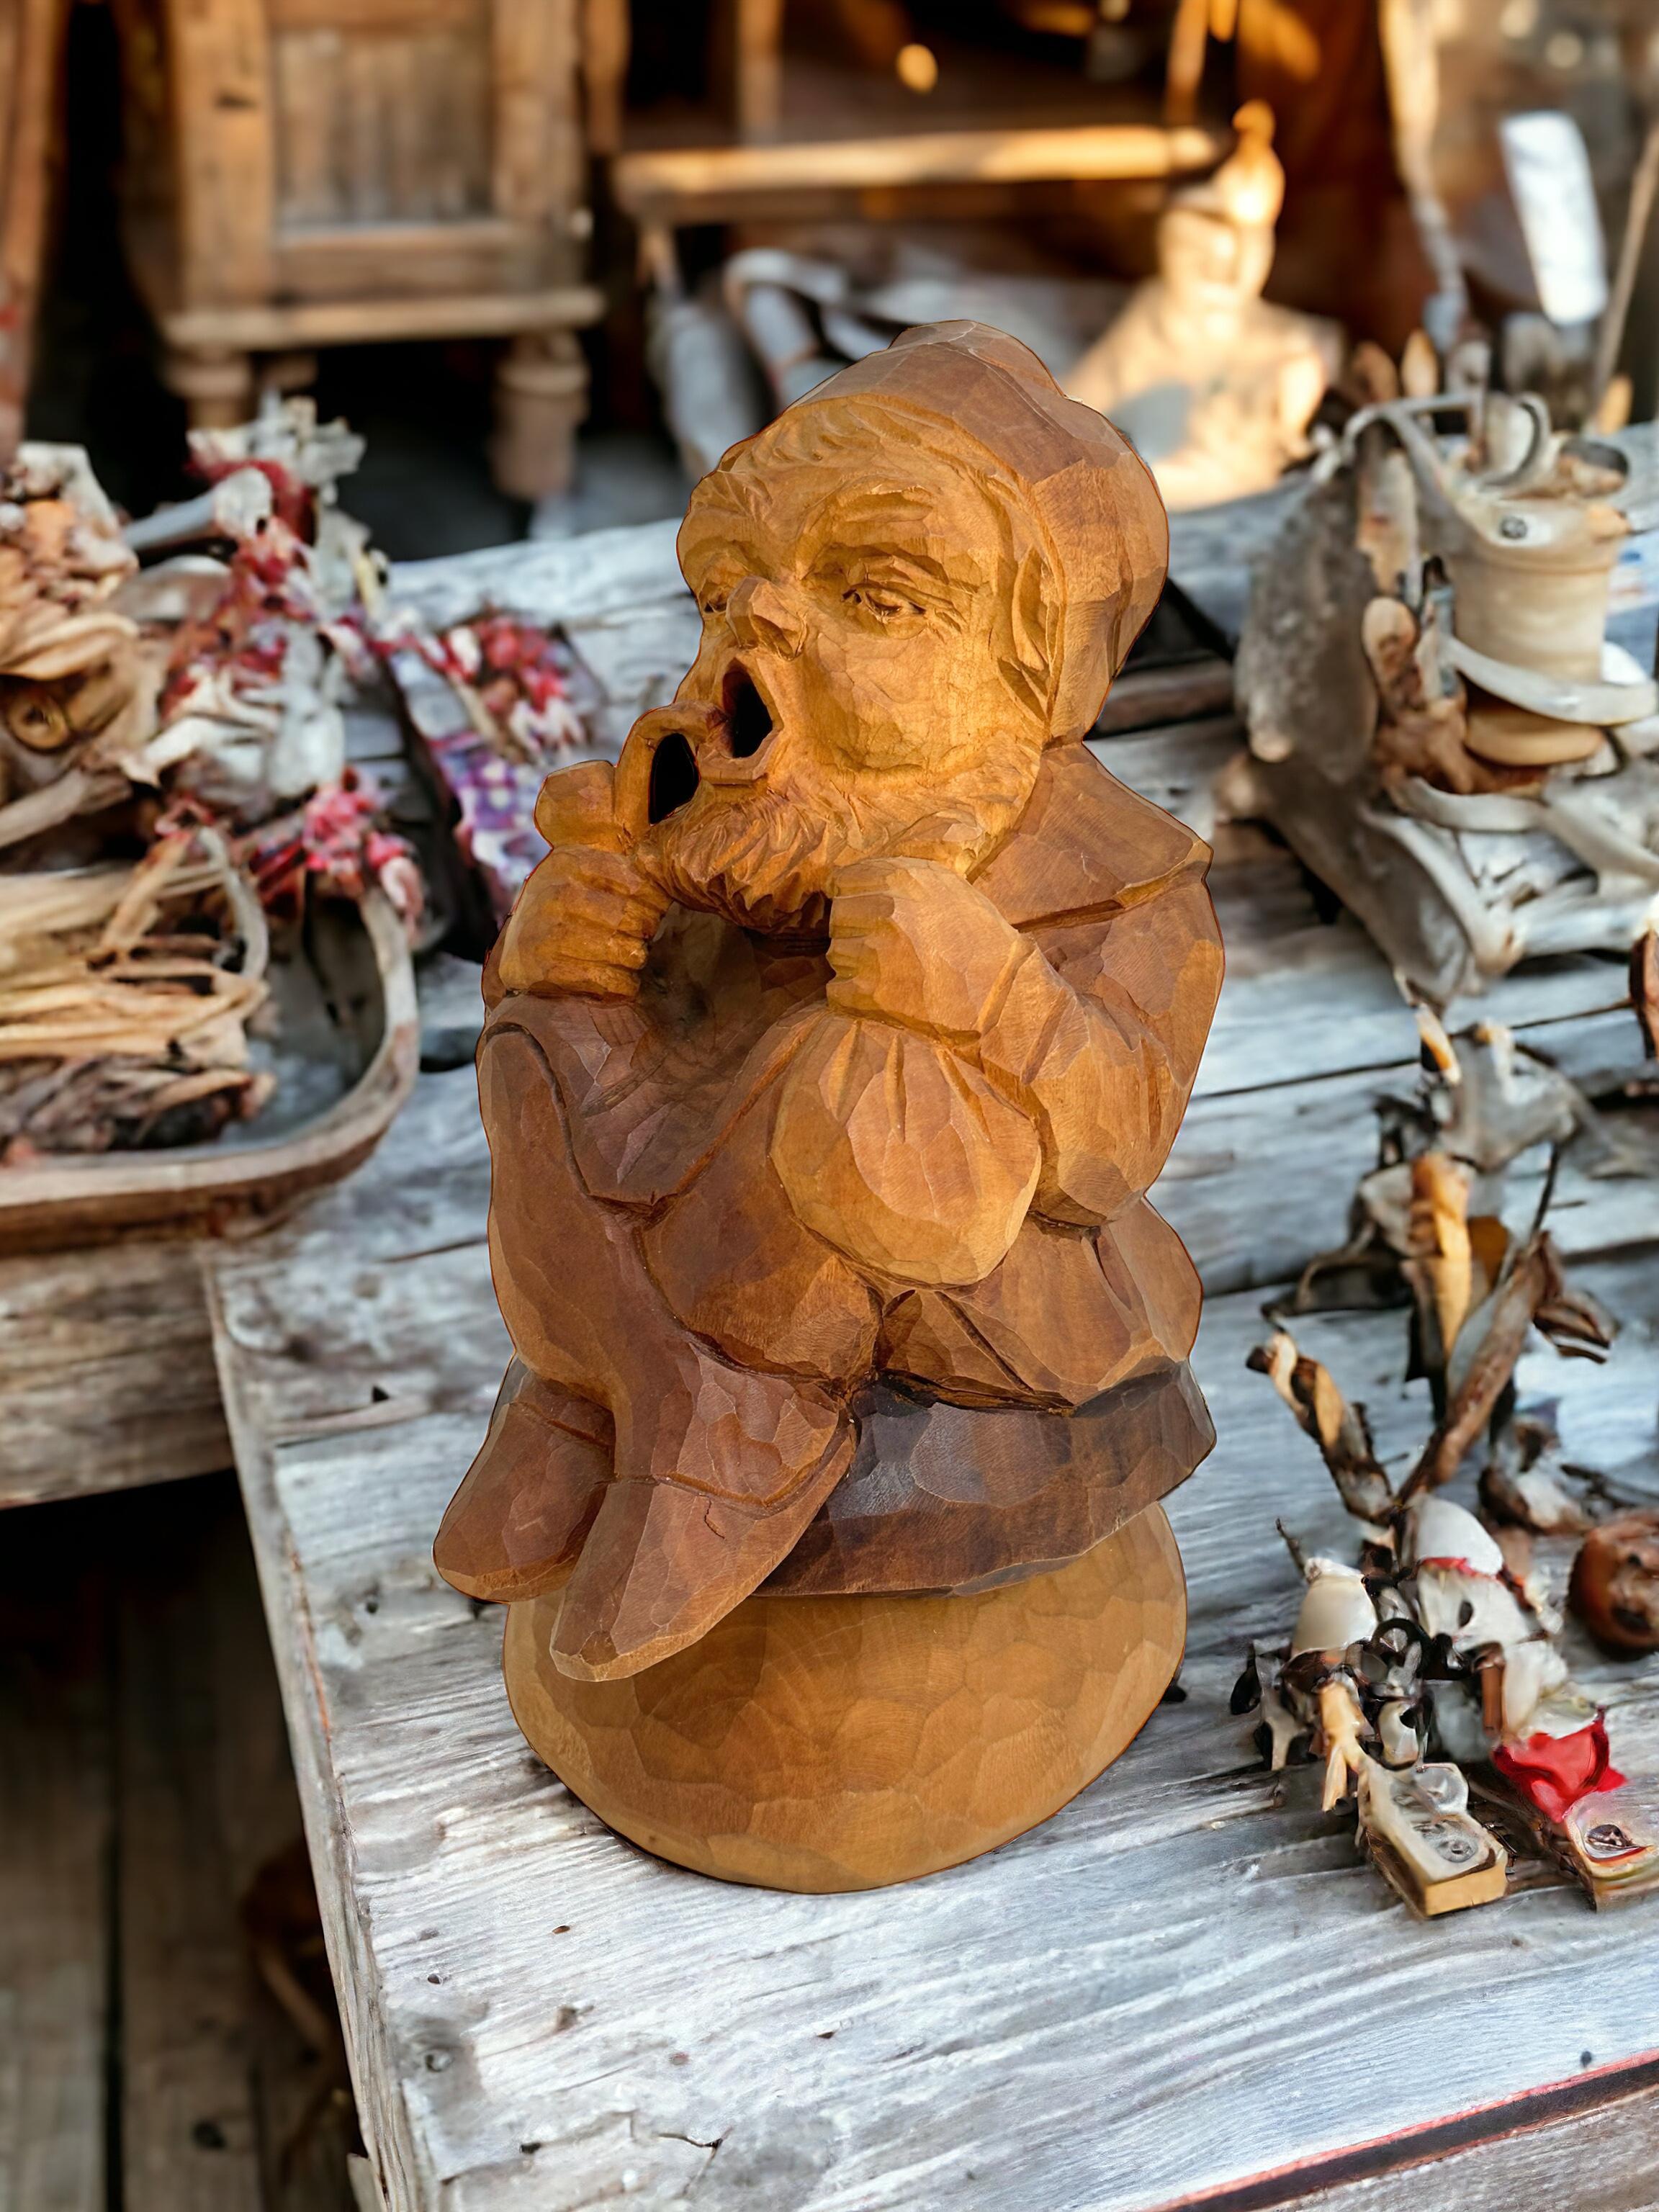 Beautiful hand carved wooden smoker figure, found at an estate sale in Nuremberg, Germany. We believe that this piece is from around 1930s or older. A nice addition to any room. Beautiful to display in your house during holiday season or just year